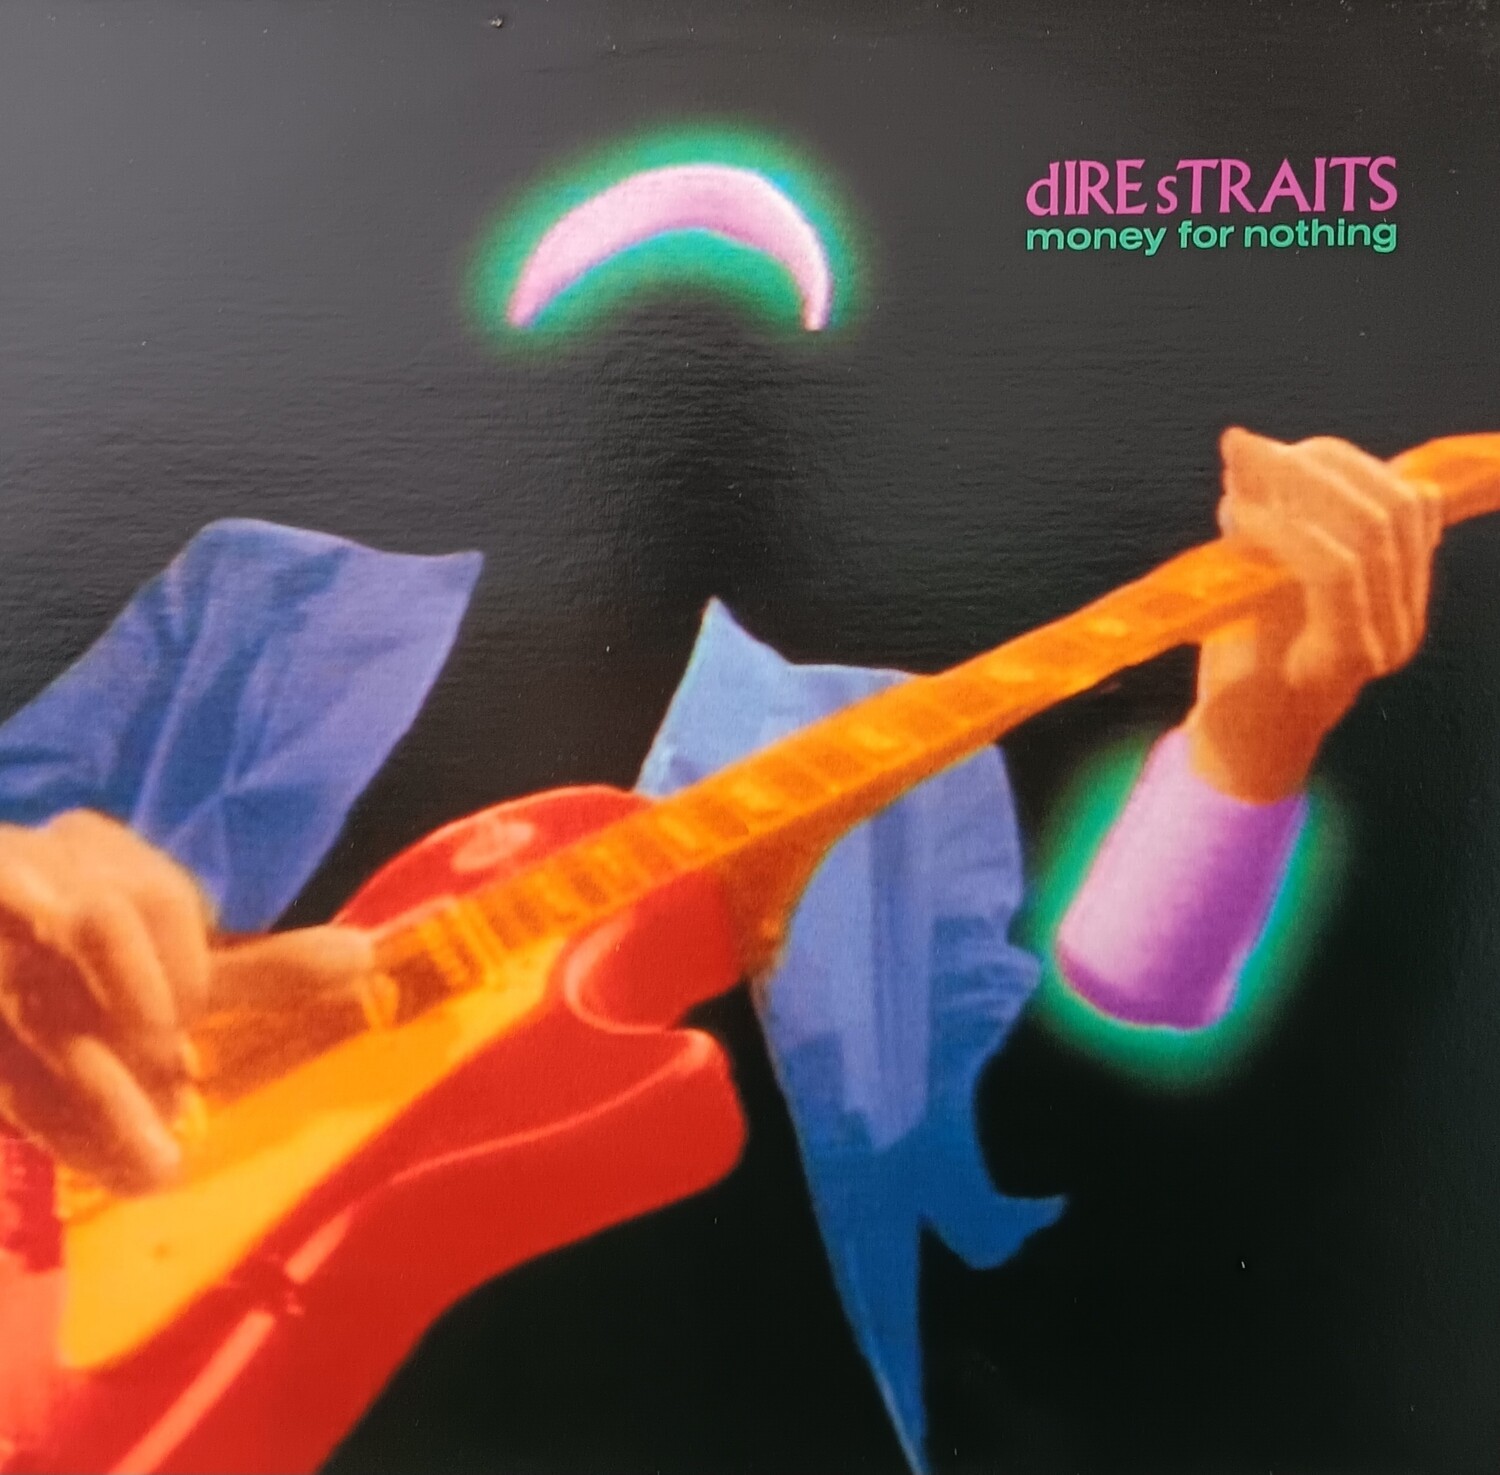 DIRE STRAITS - Money for nothing